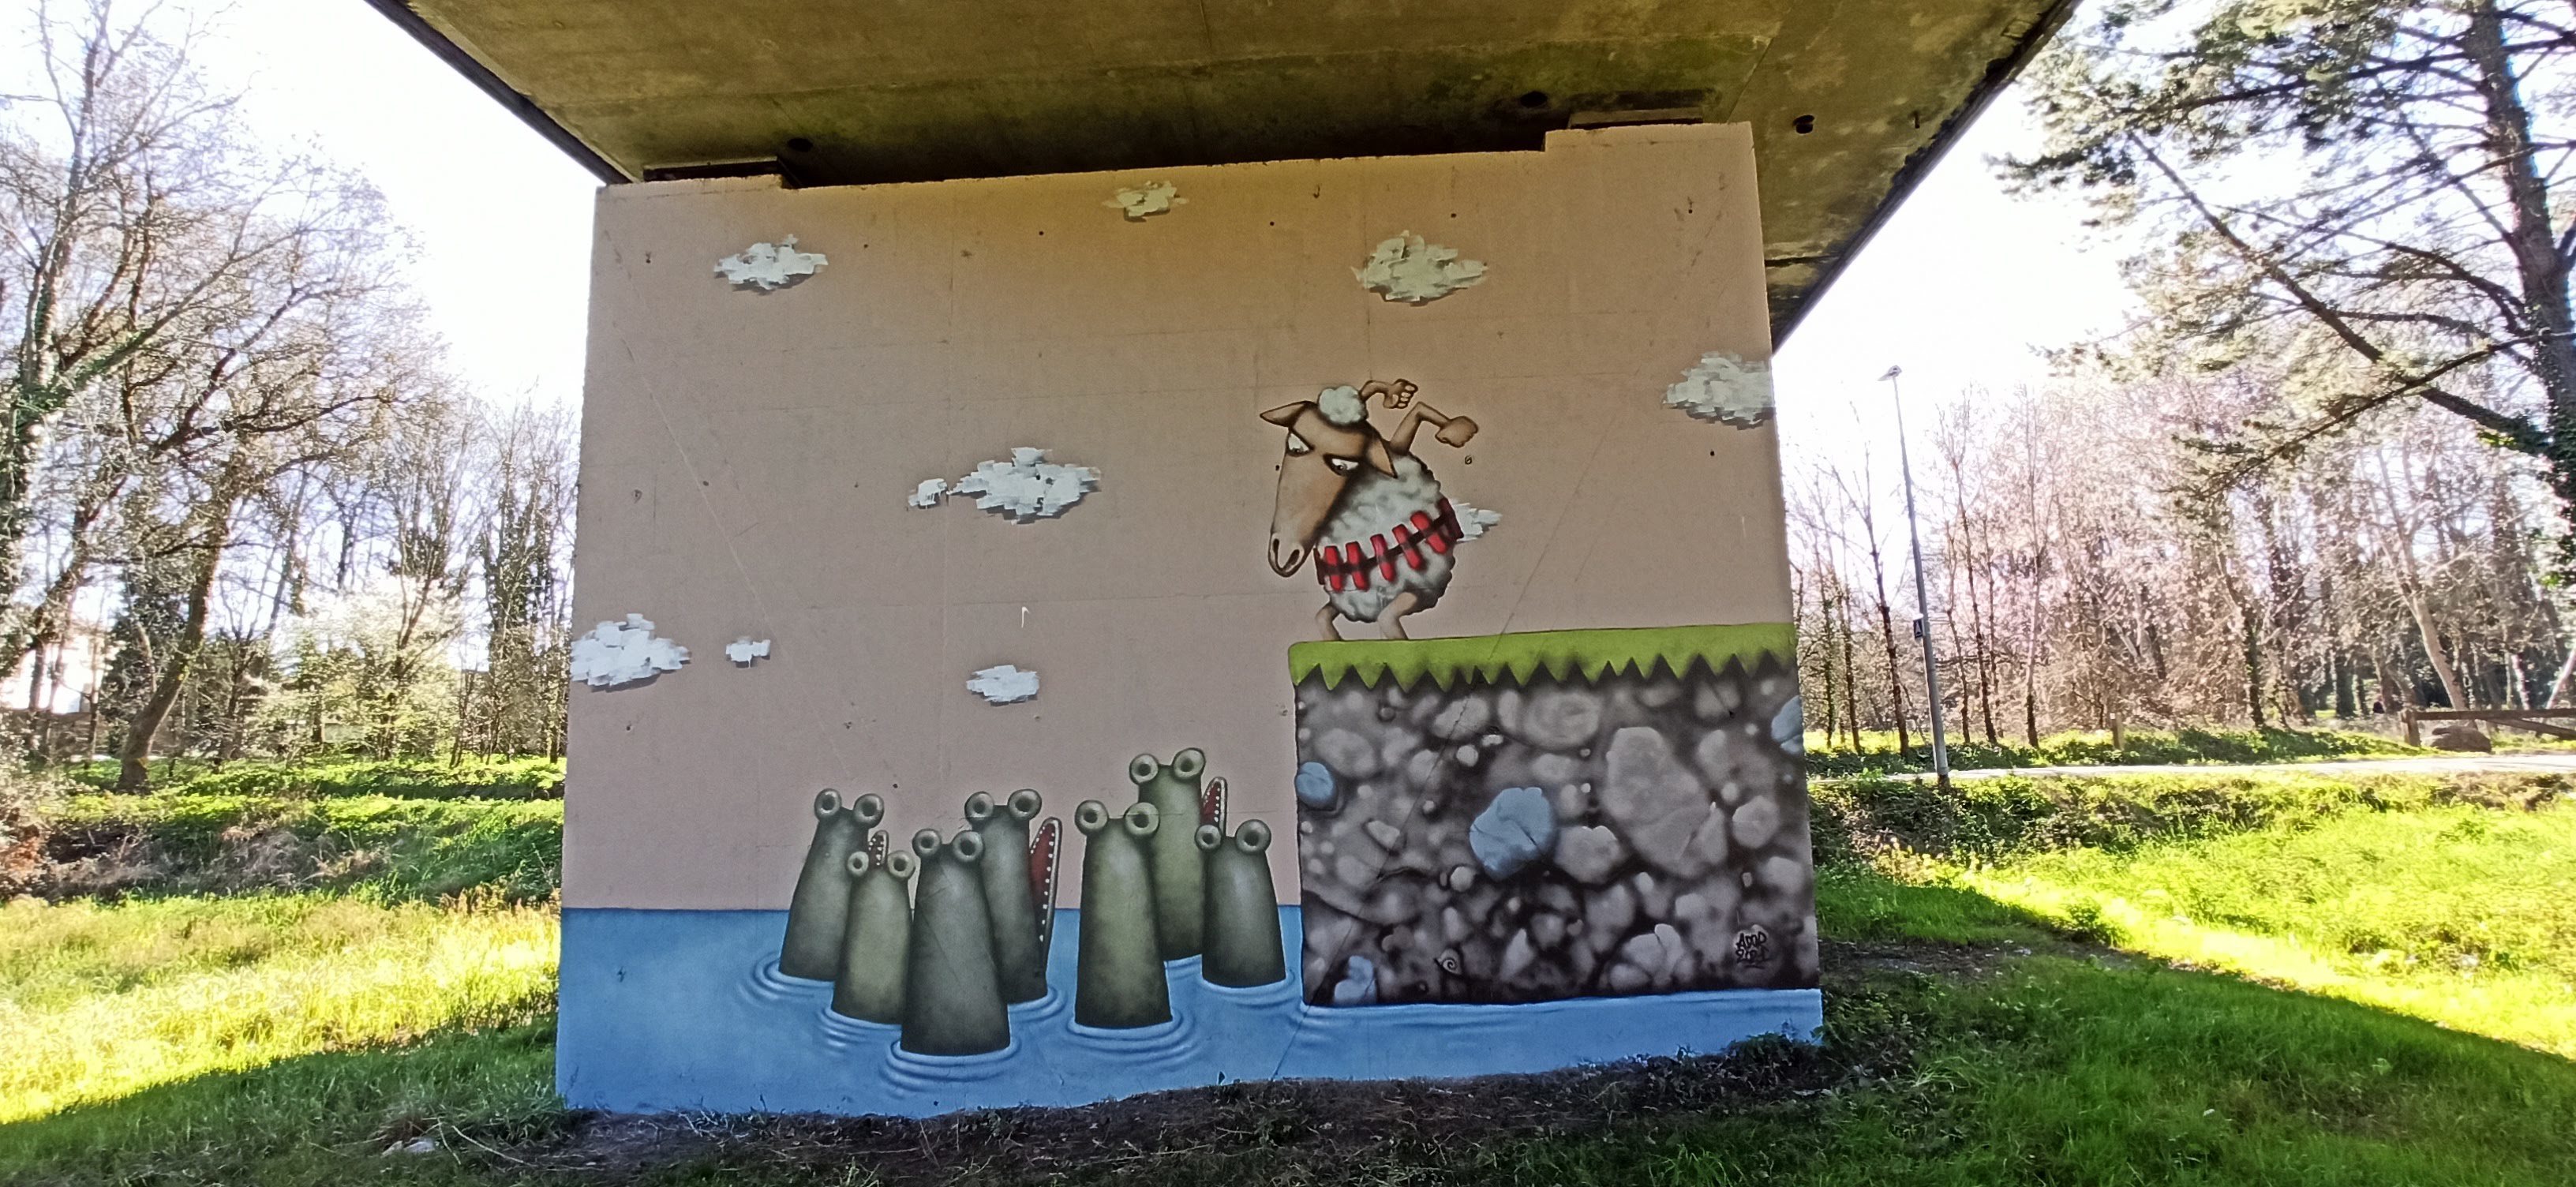 Graffiti 5036  by the artist Ador captured by Rabot in Rezé France